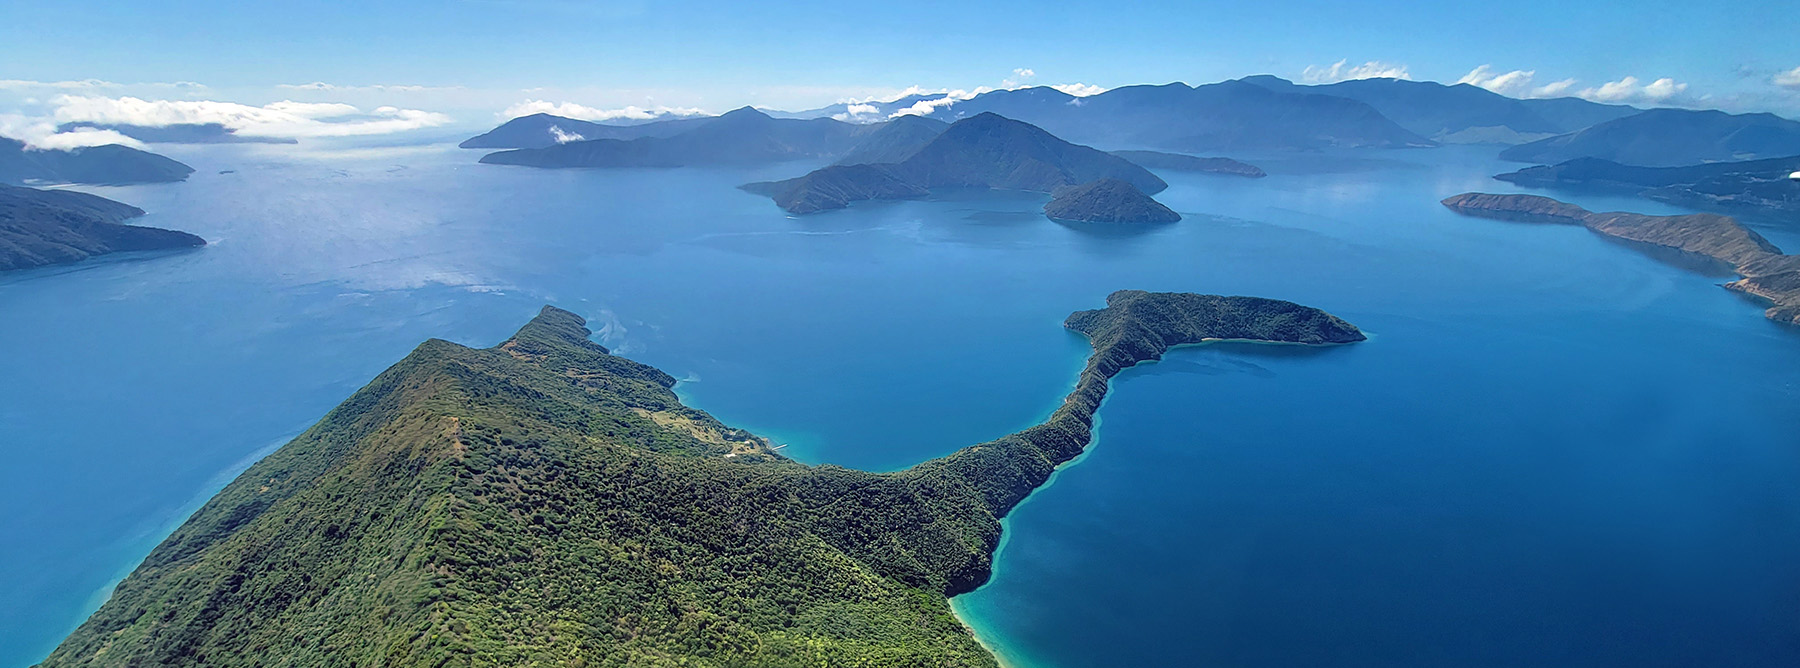 View of Marlborough Sounds from the Air